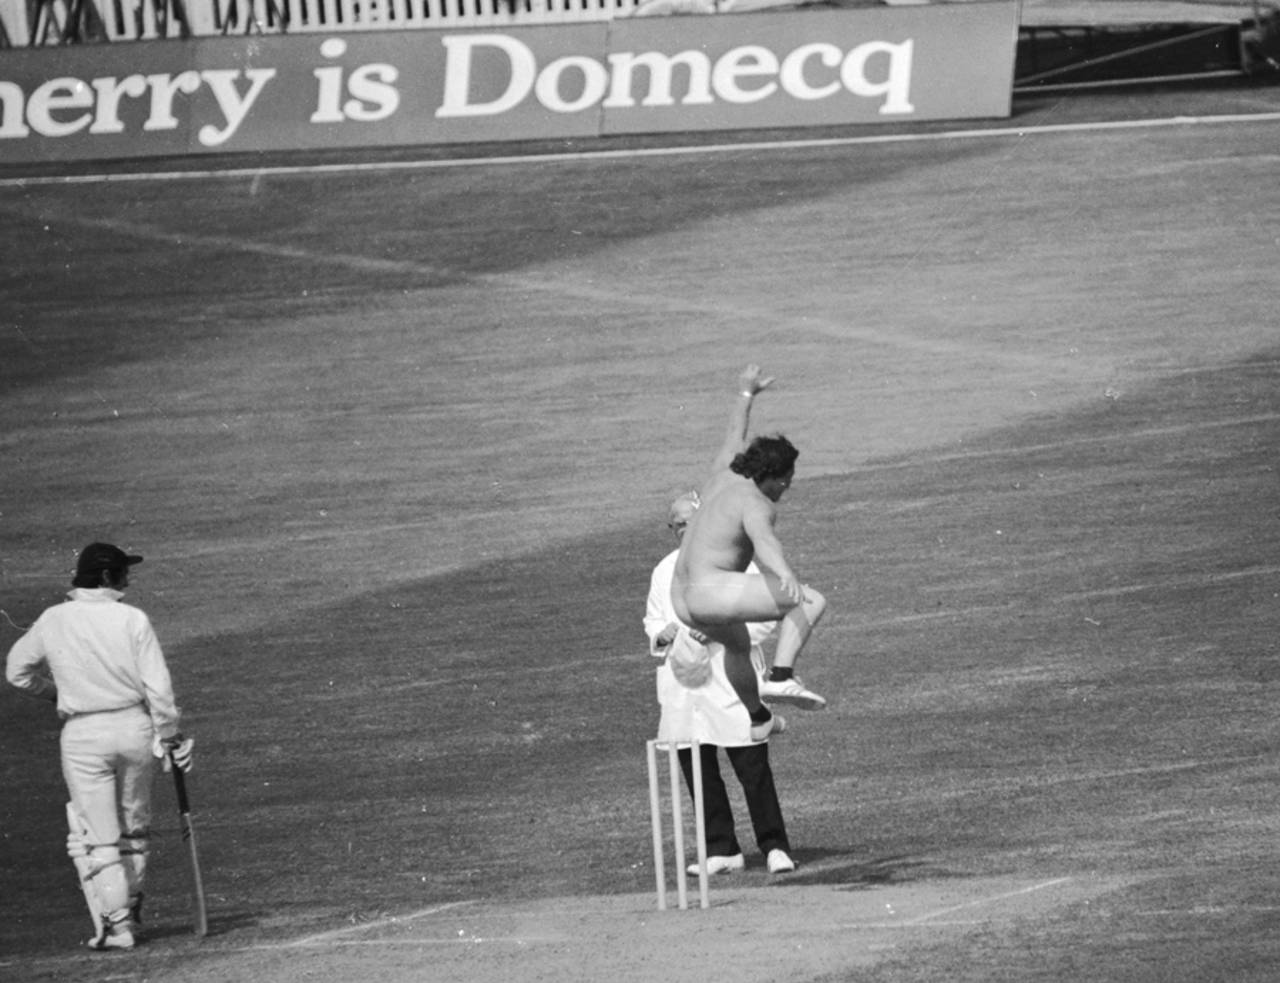 A streaker invades the pitch at Lord's, England v Australia, 2nd Test, Lord's, 4th day, August 4, 1975